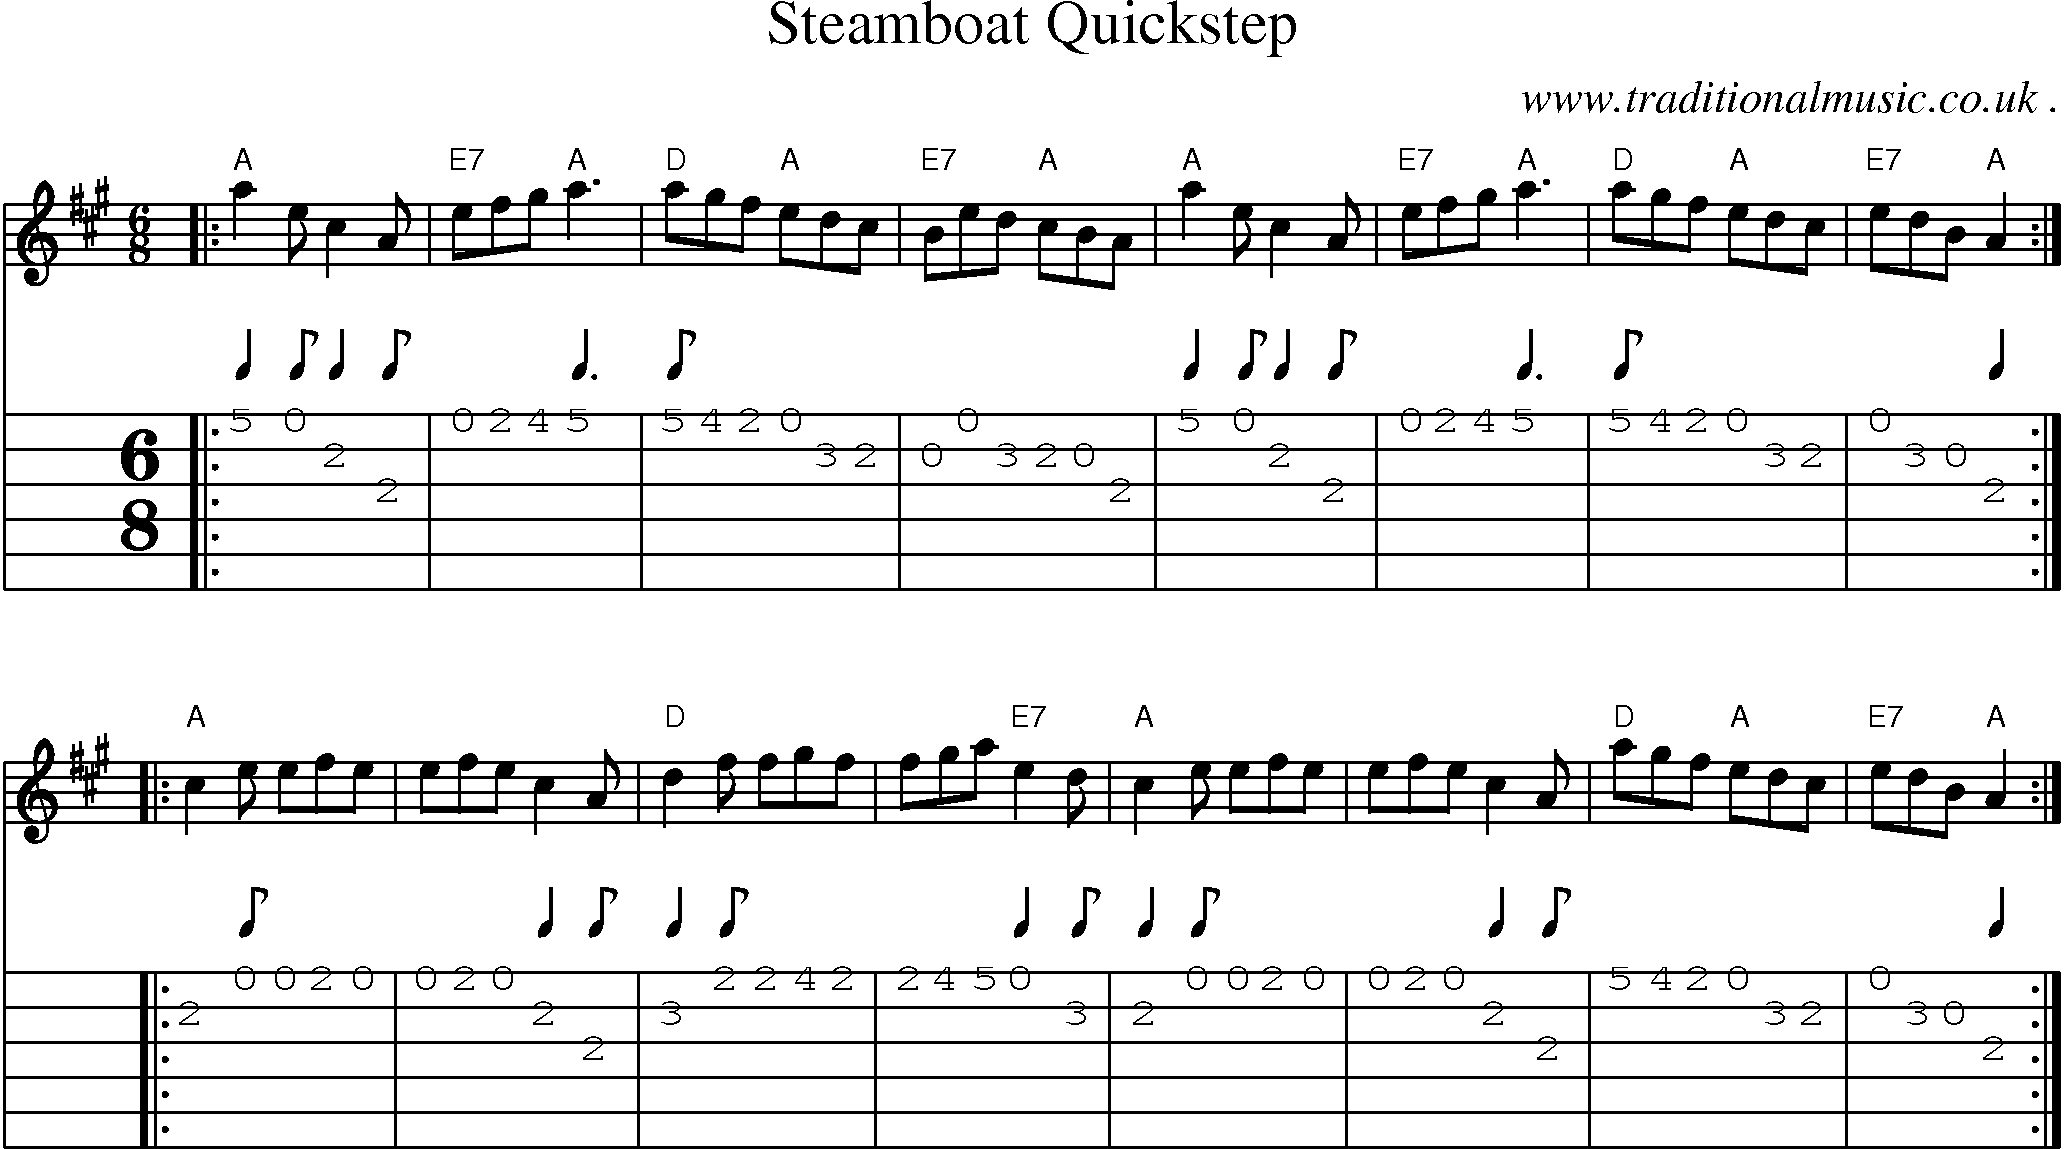 Sheet-music  score, Chords and Guitar Tabs for Steamboat Quickstep